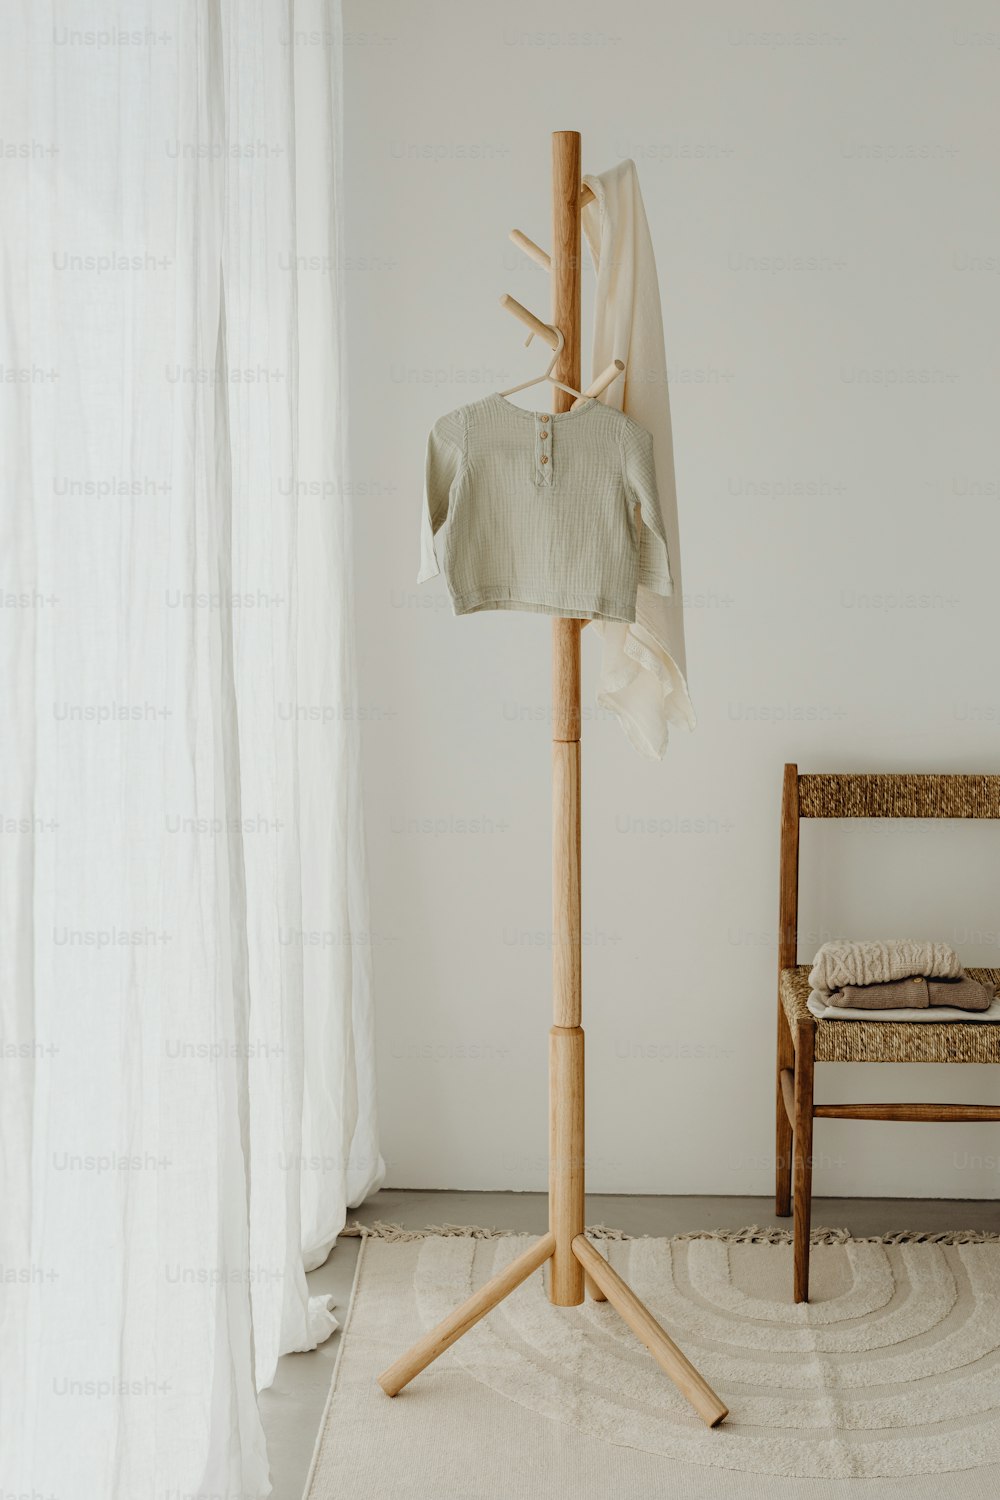 a wooden chair sitting next to a white curtain